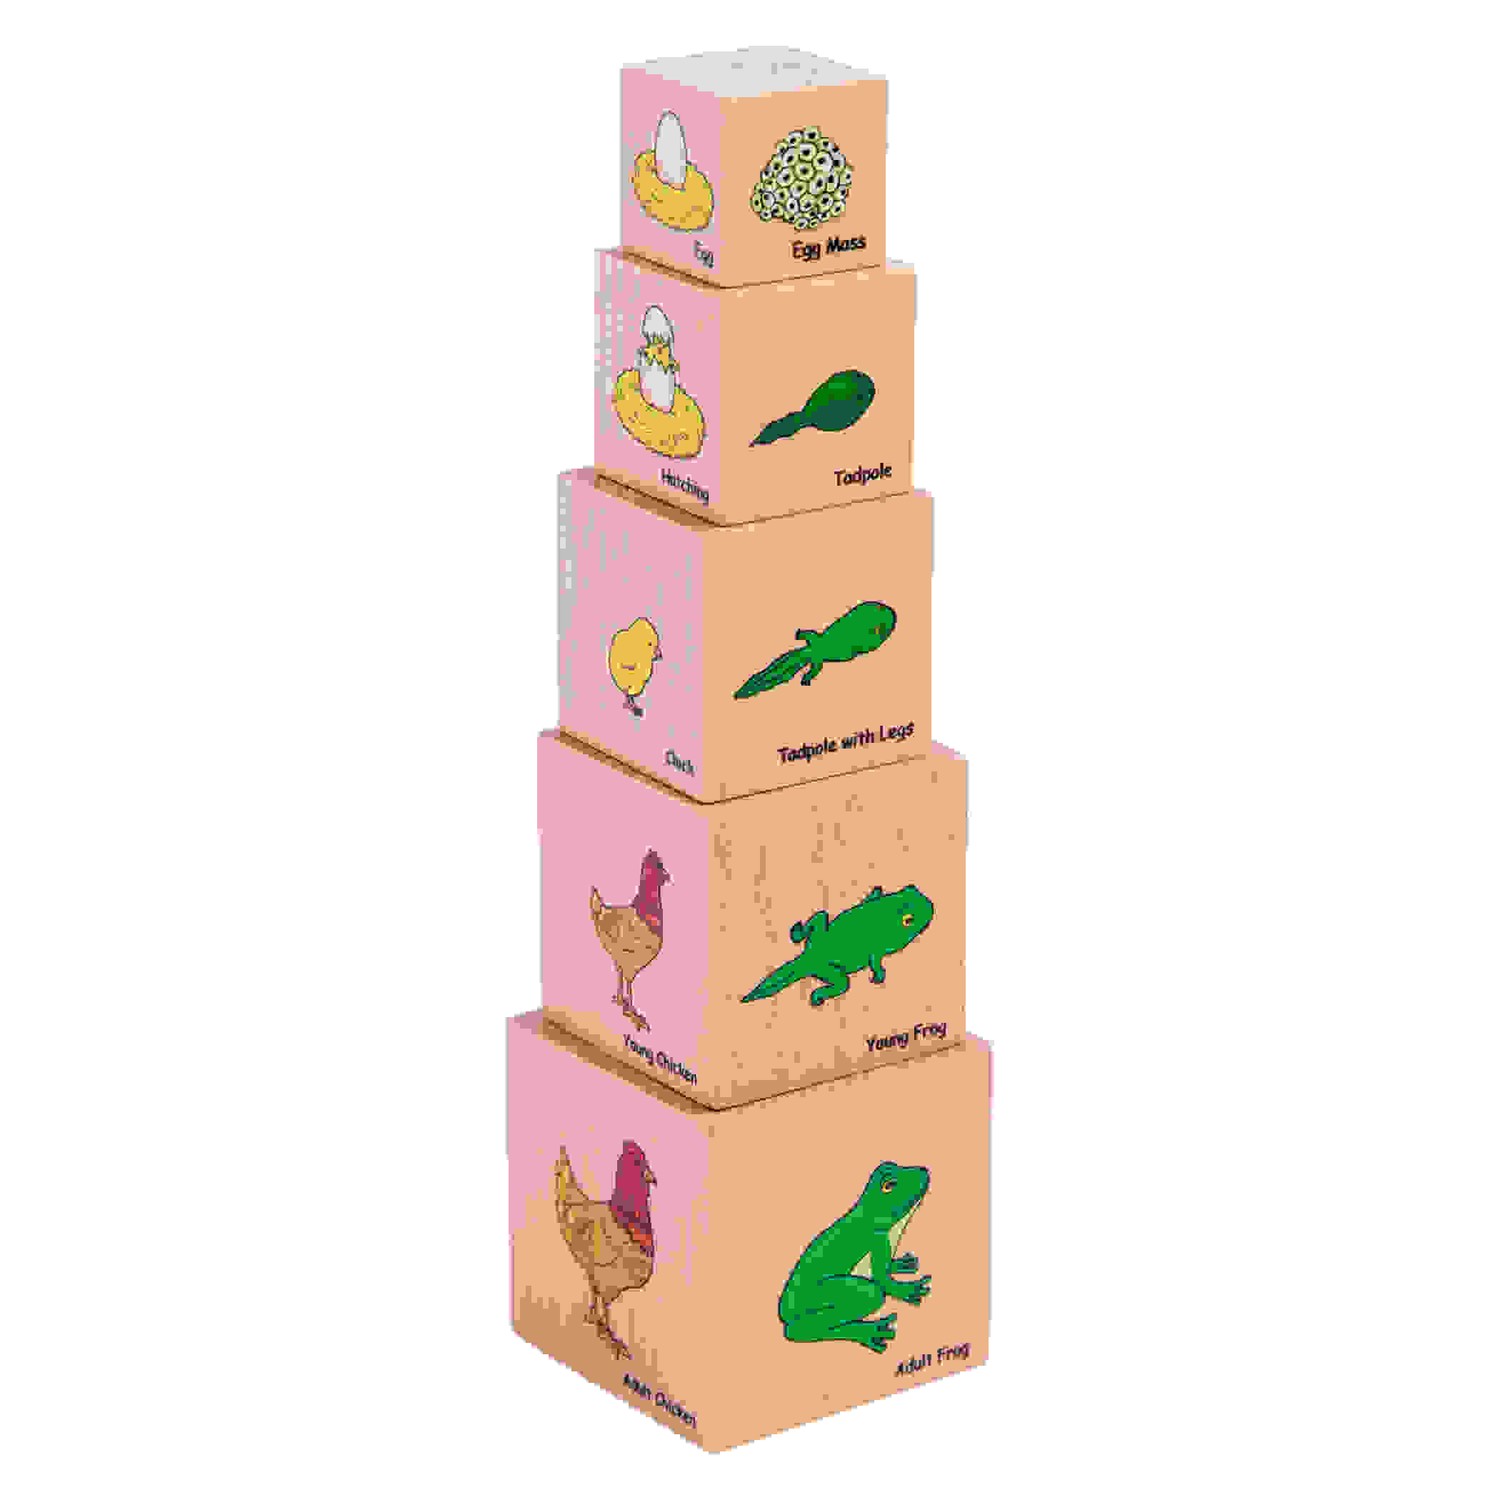 Lifecycle Wooden Blocks - Set of 5